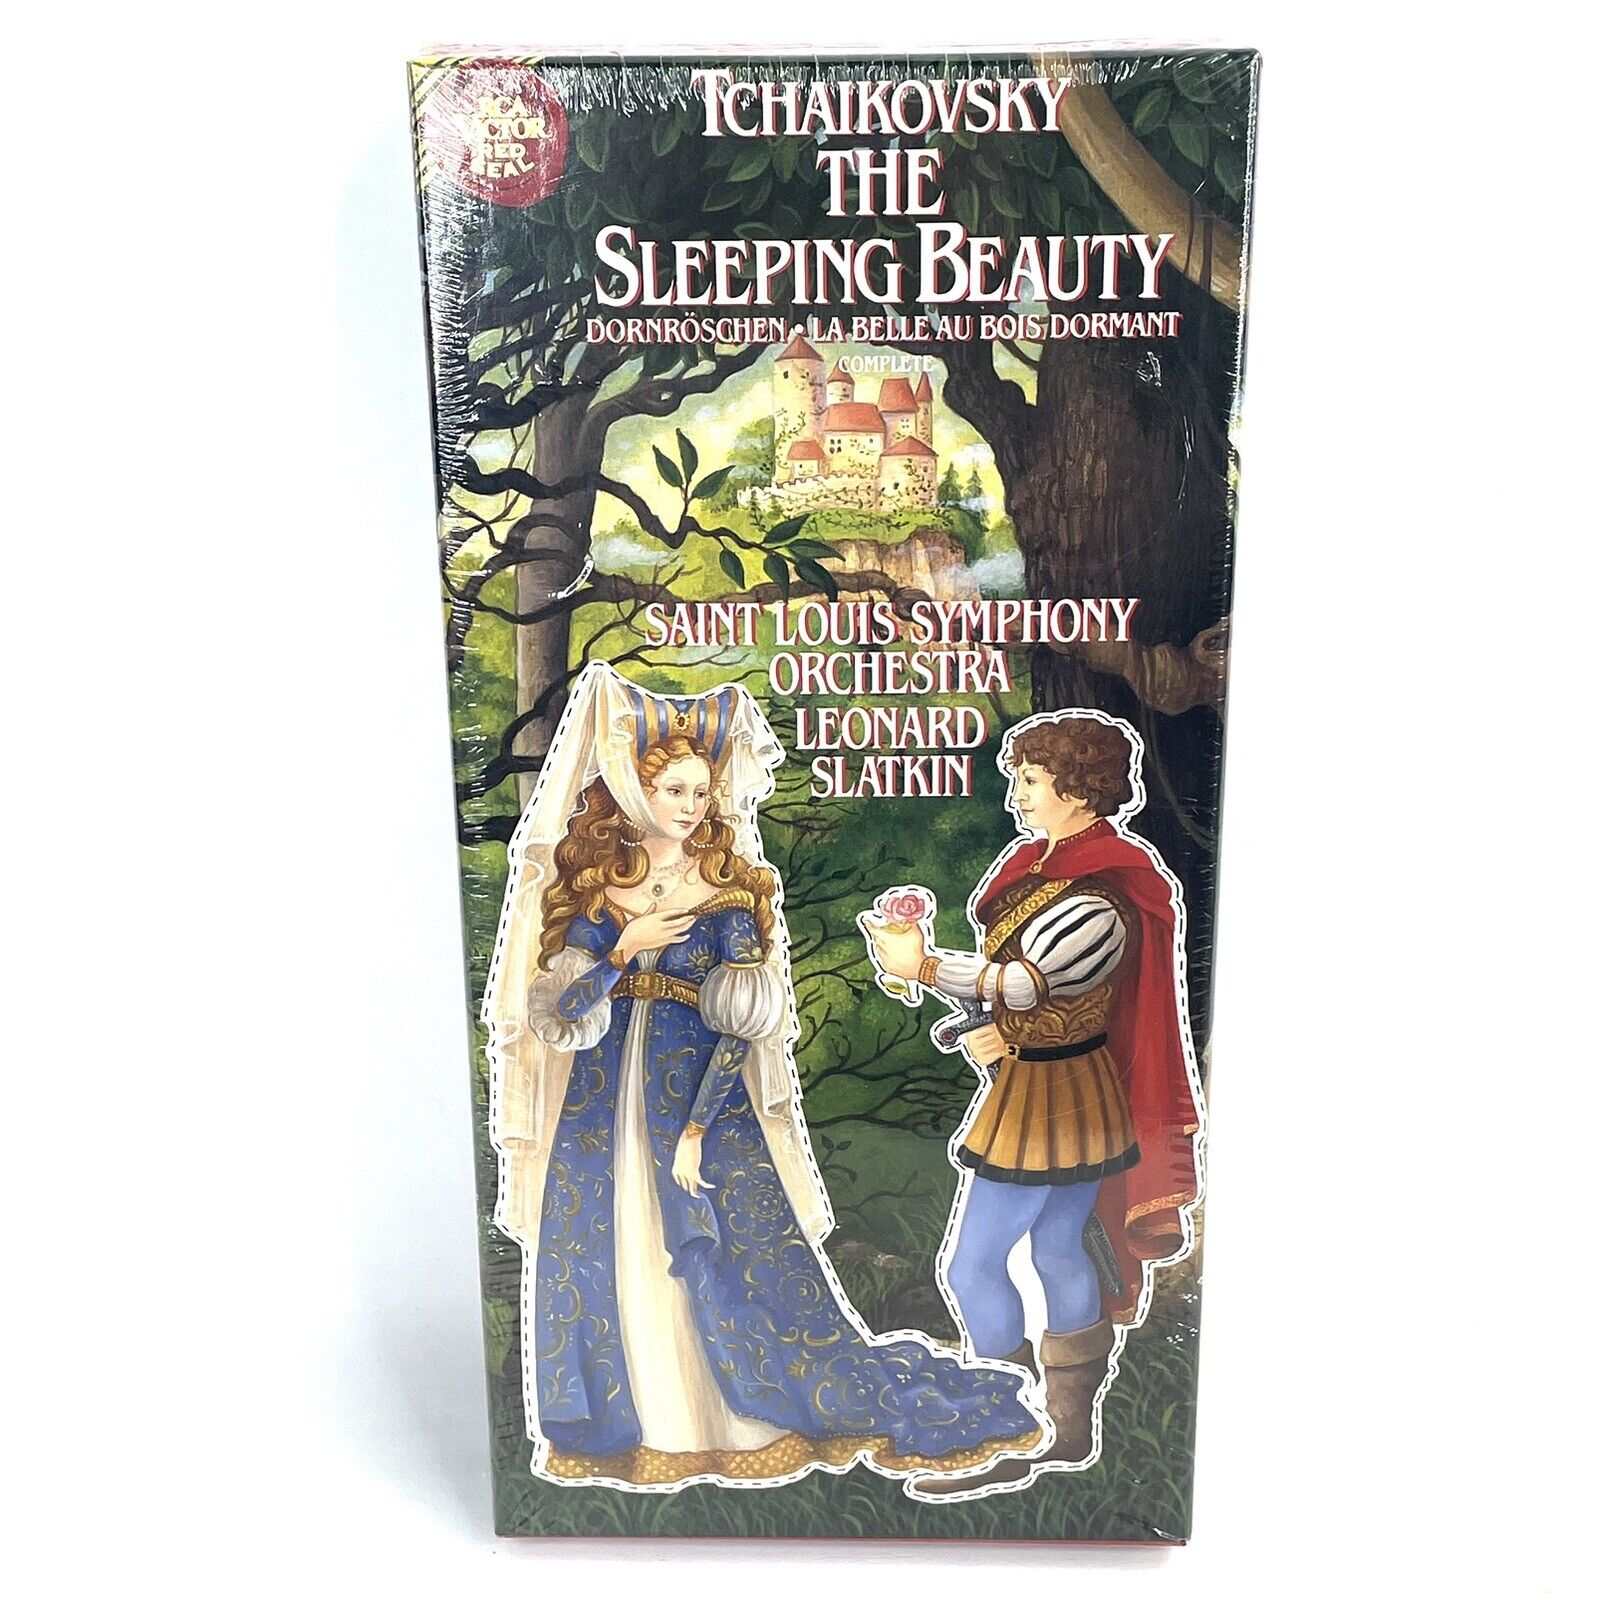 Tchaikovsky The Sleeping Beauty complete Deluxe Gift Edition